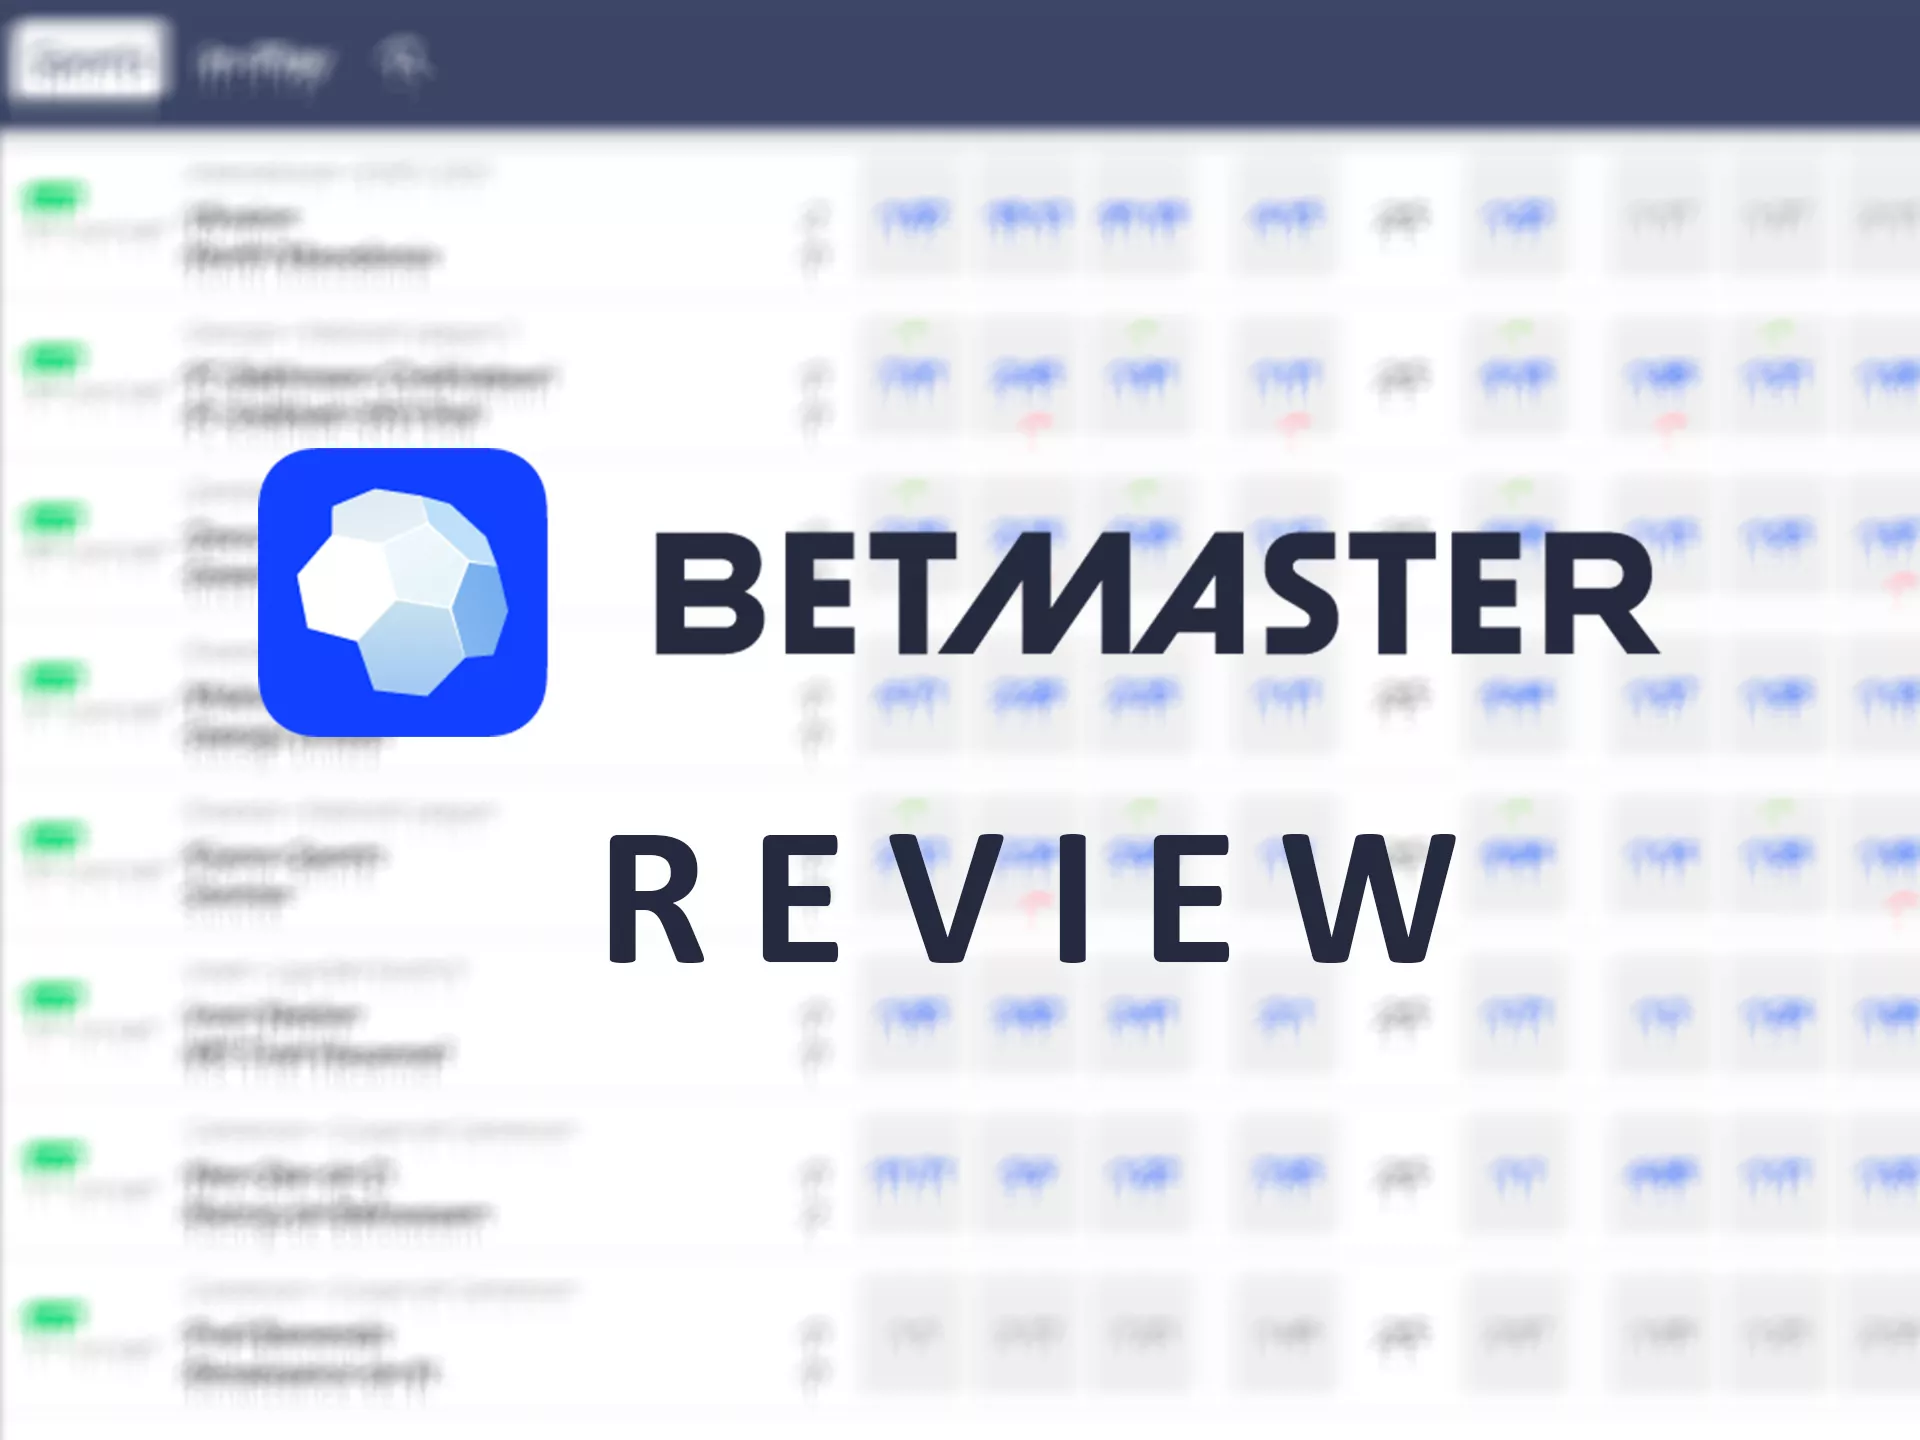 Learm more about Betmaster and register in it.